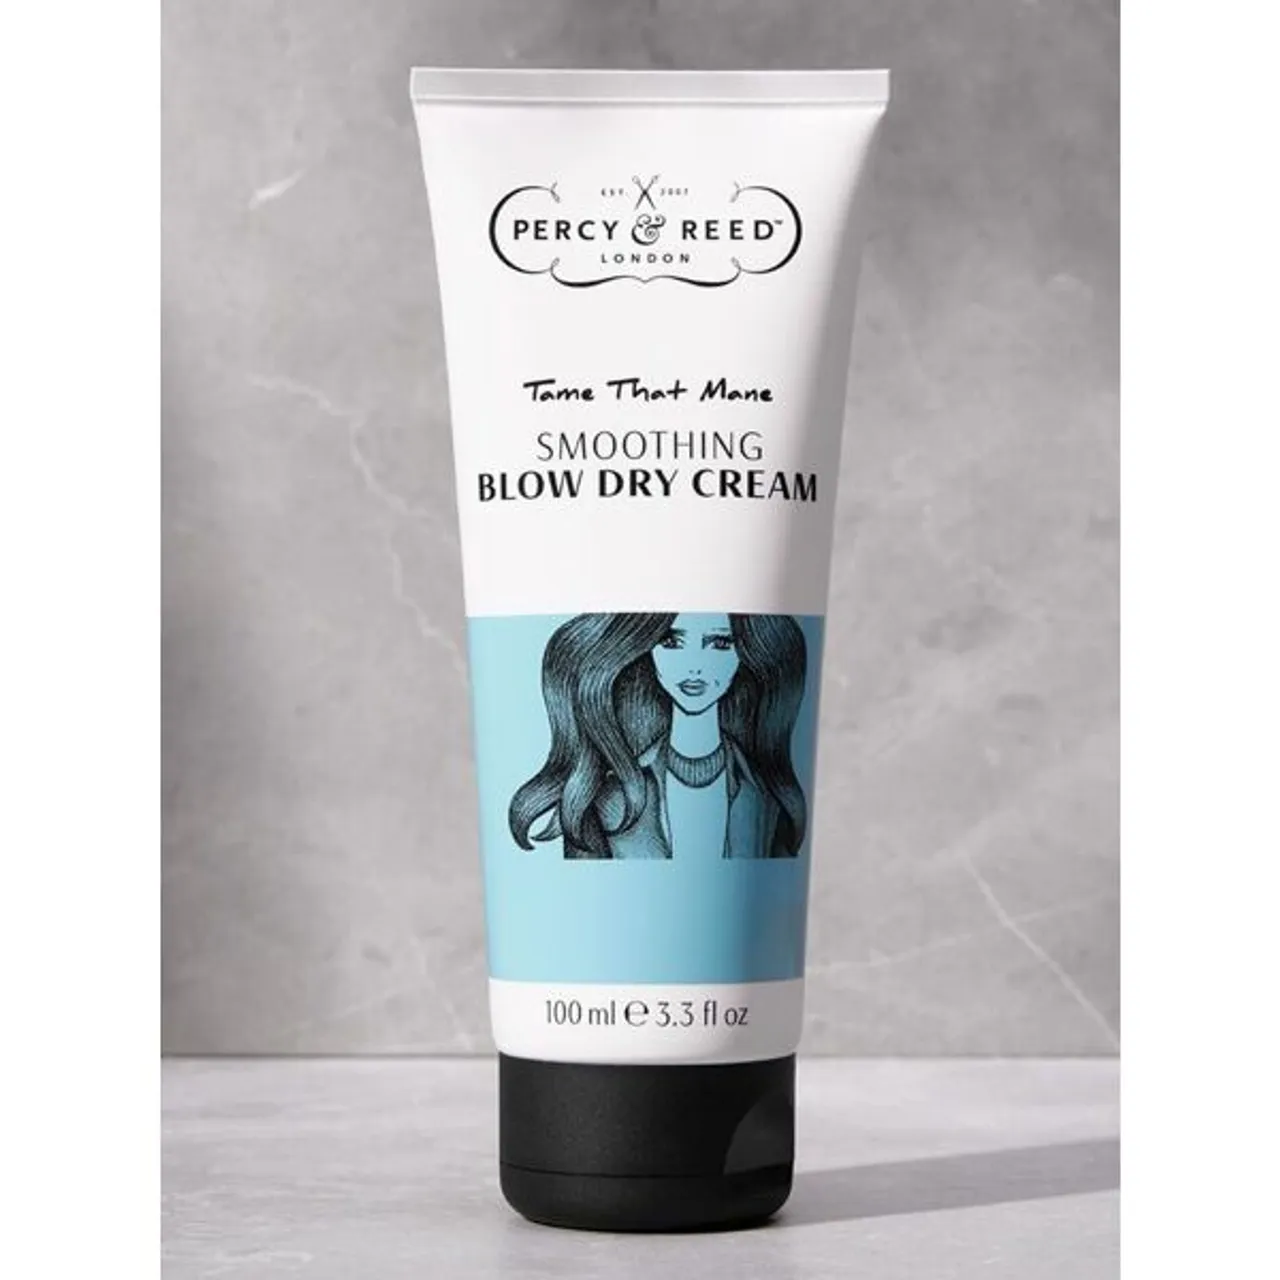 Percy & Reed Tame That Mane Smoothing Blow Dry Cream, 100ml - Unisex